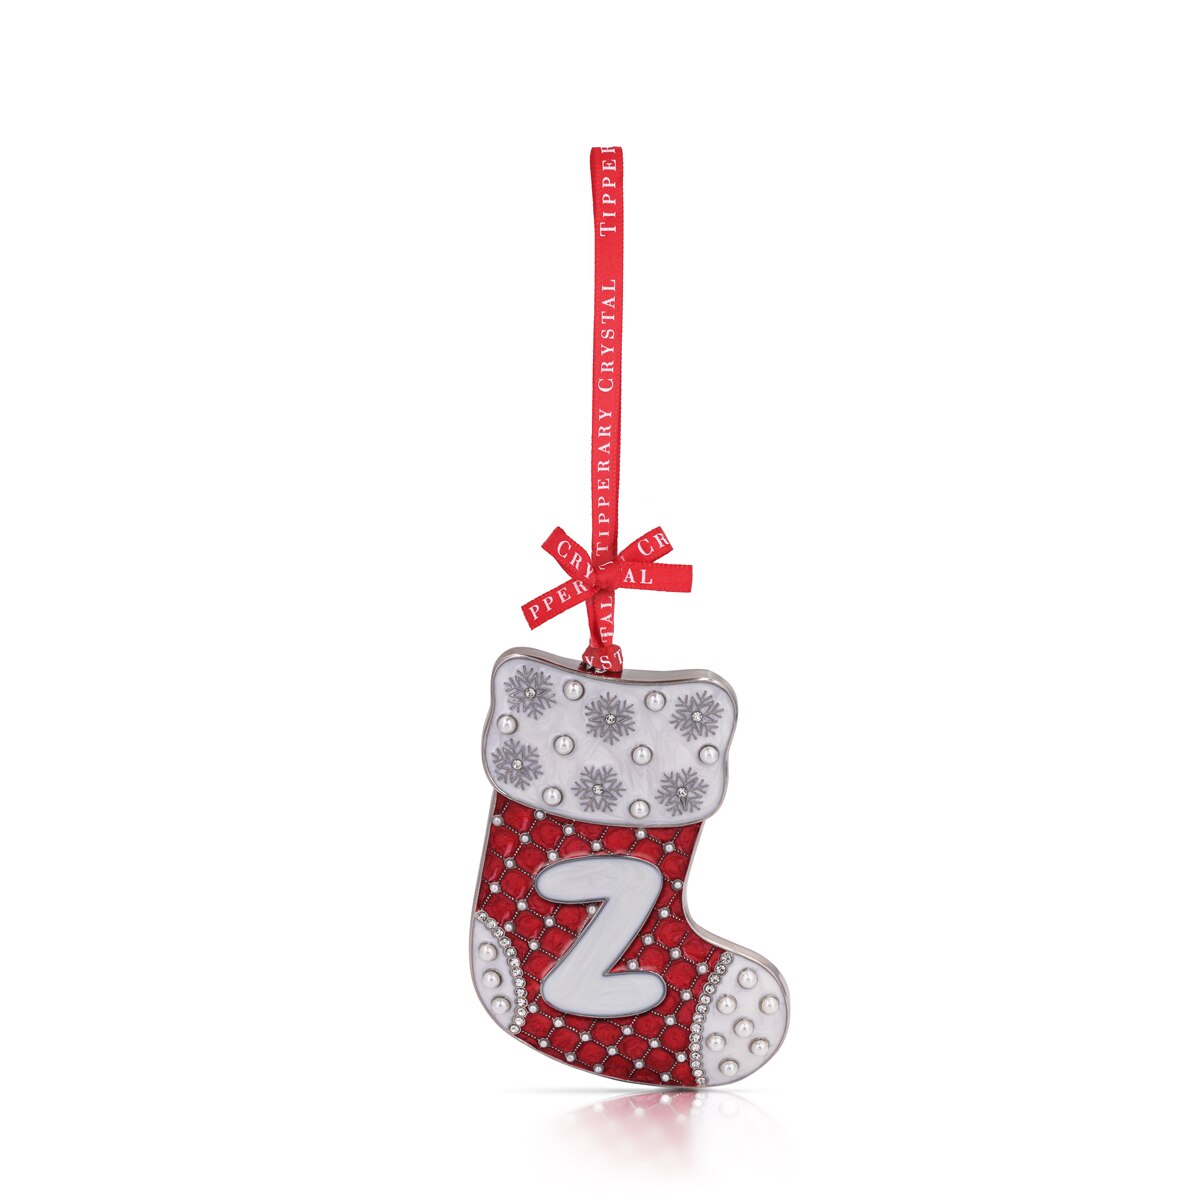 Tipperary Crystal Alphabet Stocking Christmas Decoration - Z - Last chance to buy